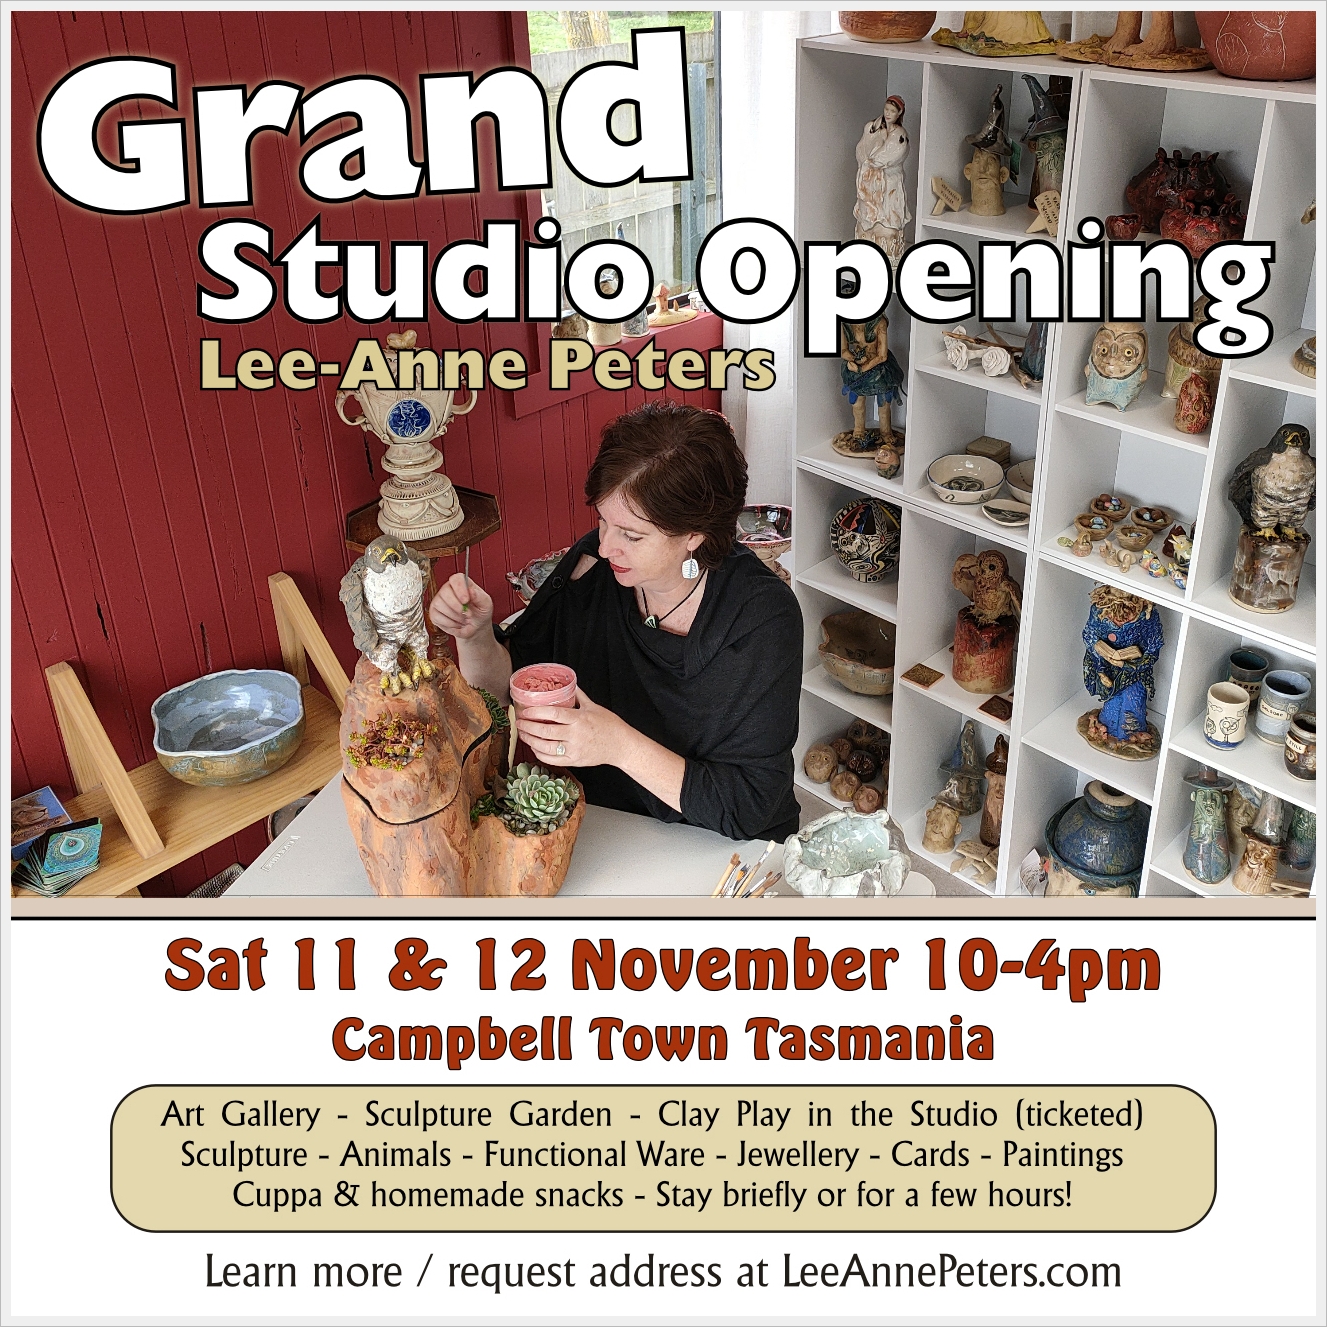 Image shows a wall shelving unit displaying beautifully crafted ceramic sculptures, Lee Anne Peters working on finishing a ceramic sculpture with the text Event News Grand Studio Opening at Lee-Anne Peters Ceramics Art Trails Tasmania